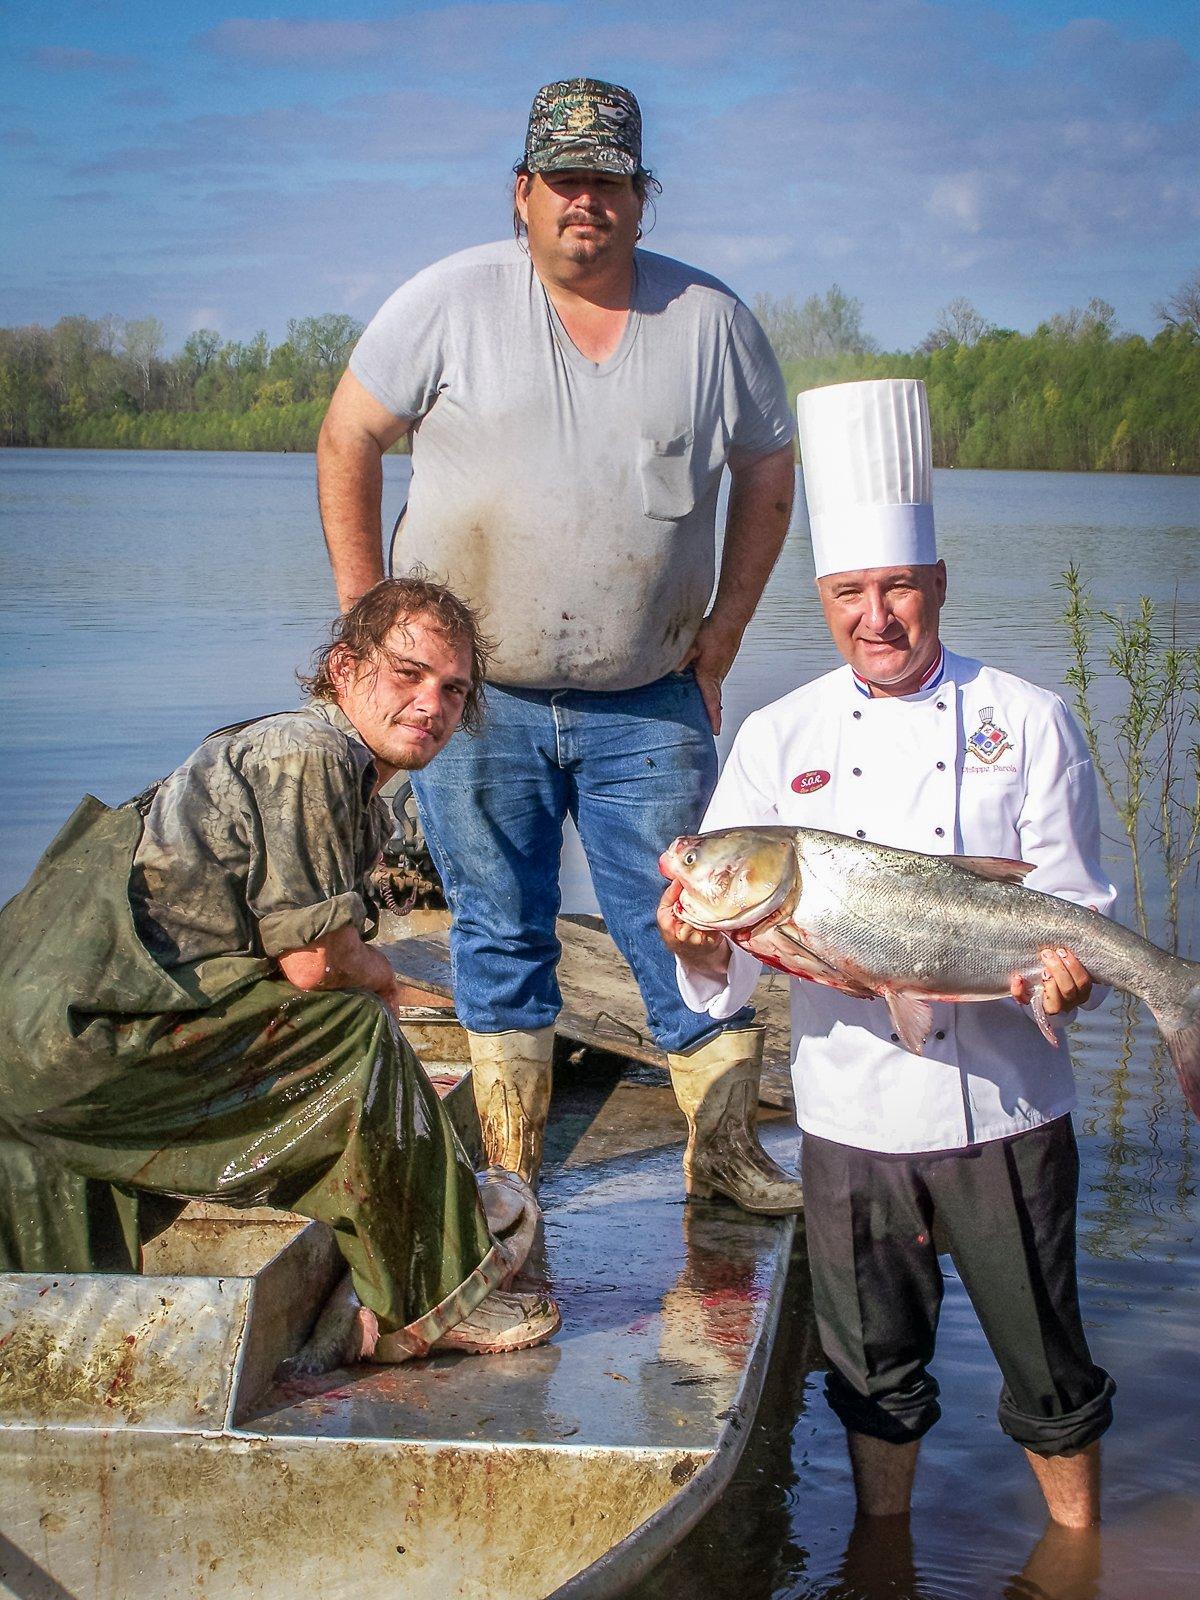 Chef Philippe with an invasive carp straight from the fishermen. Photo by Chef Philippe